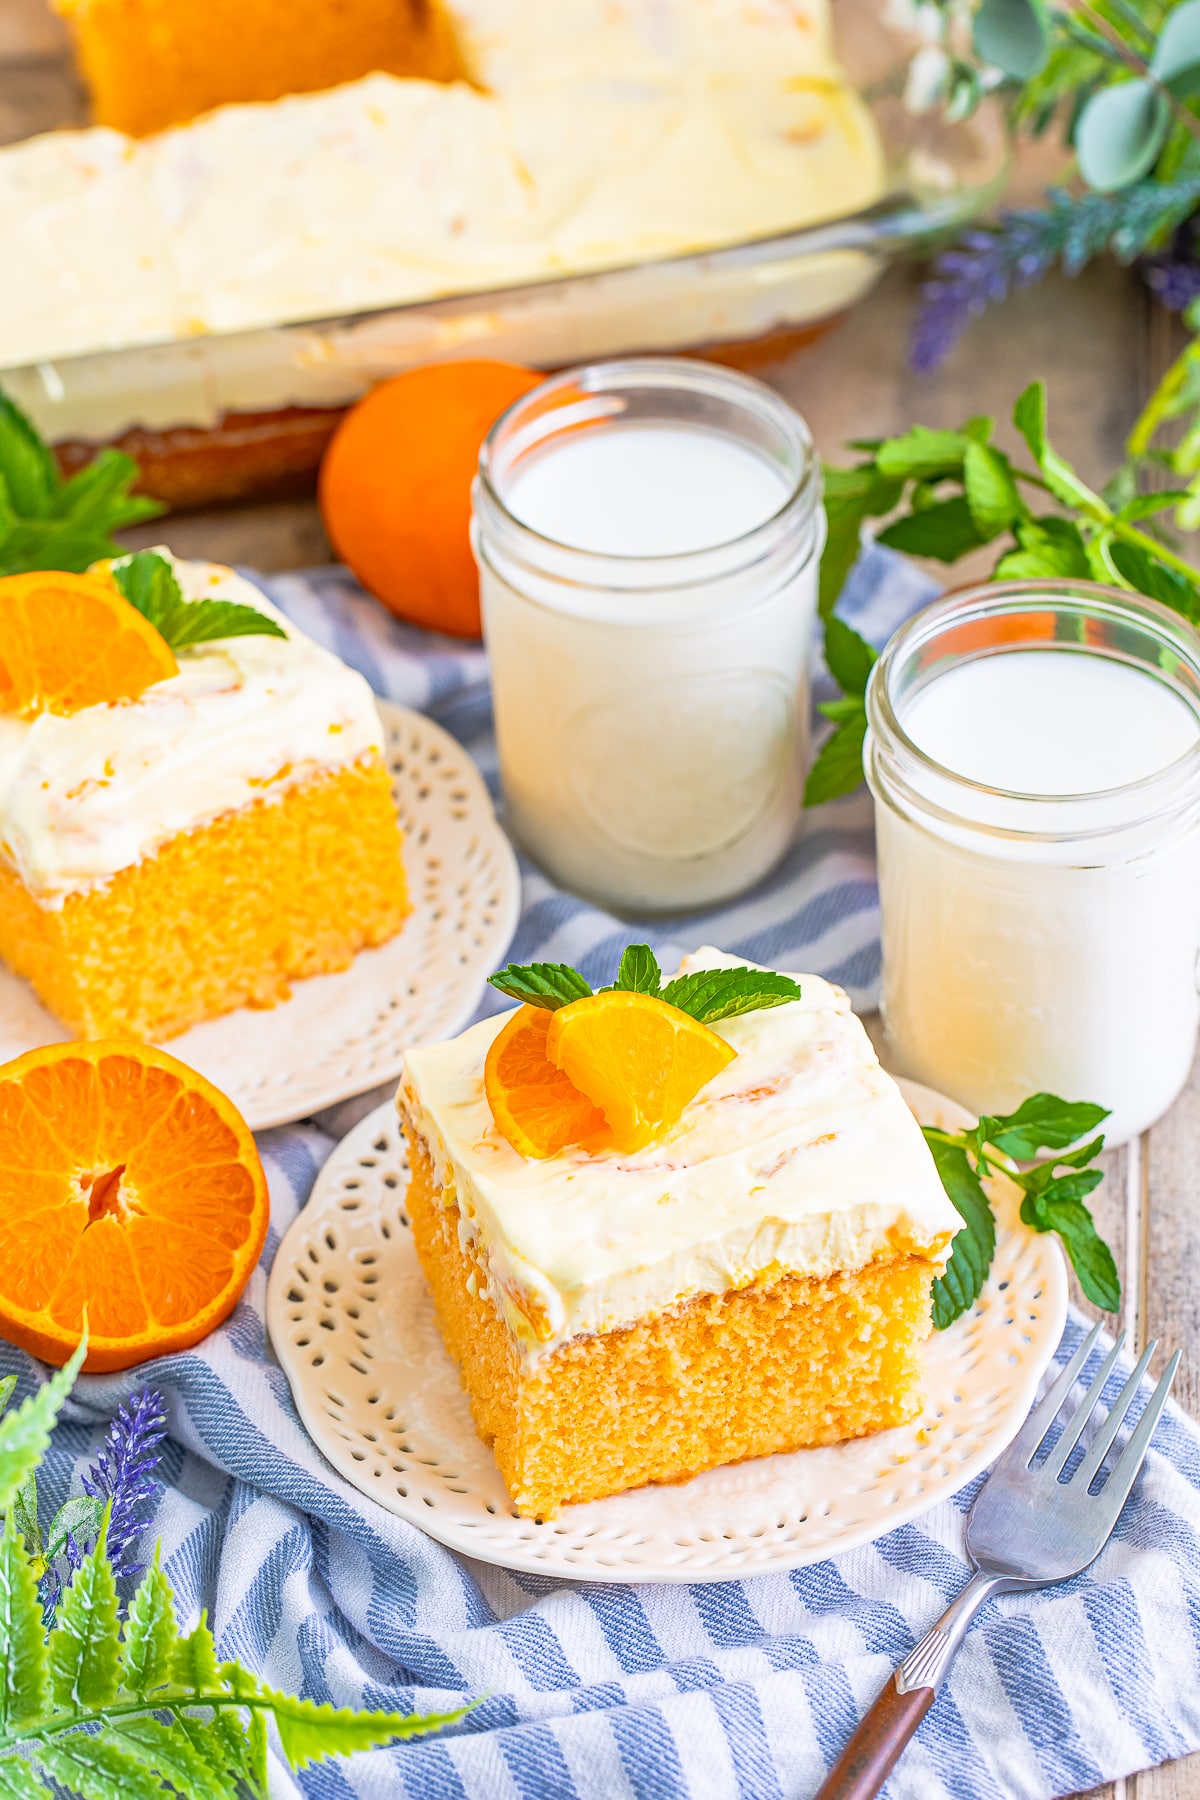 slices of Orange Creamsicle Cake with blue striped linen on serving plates